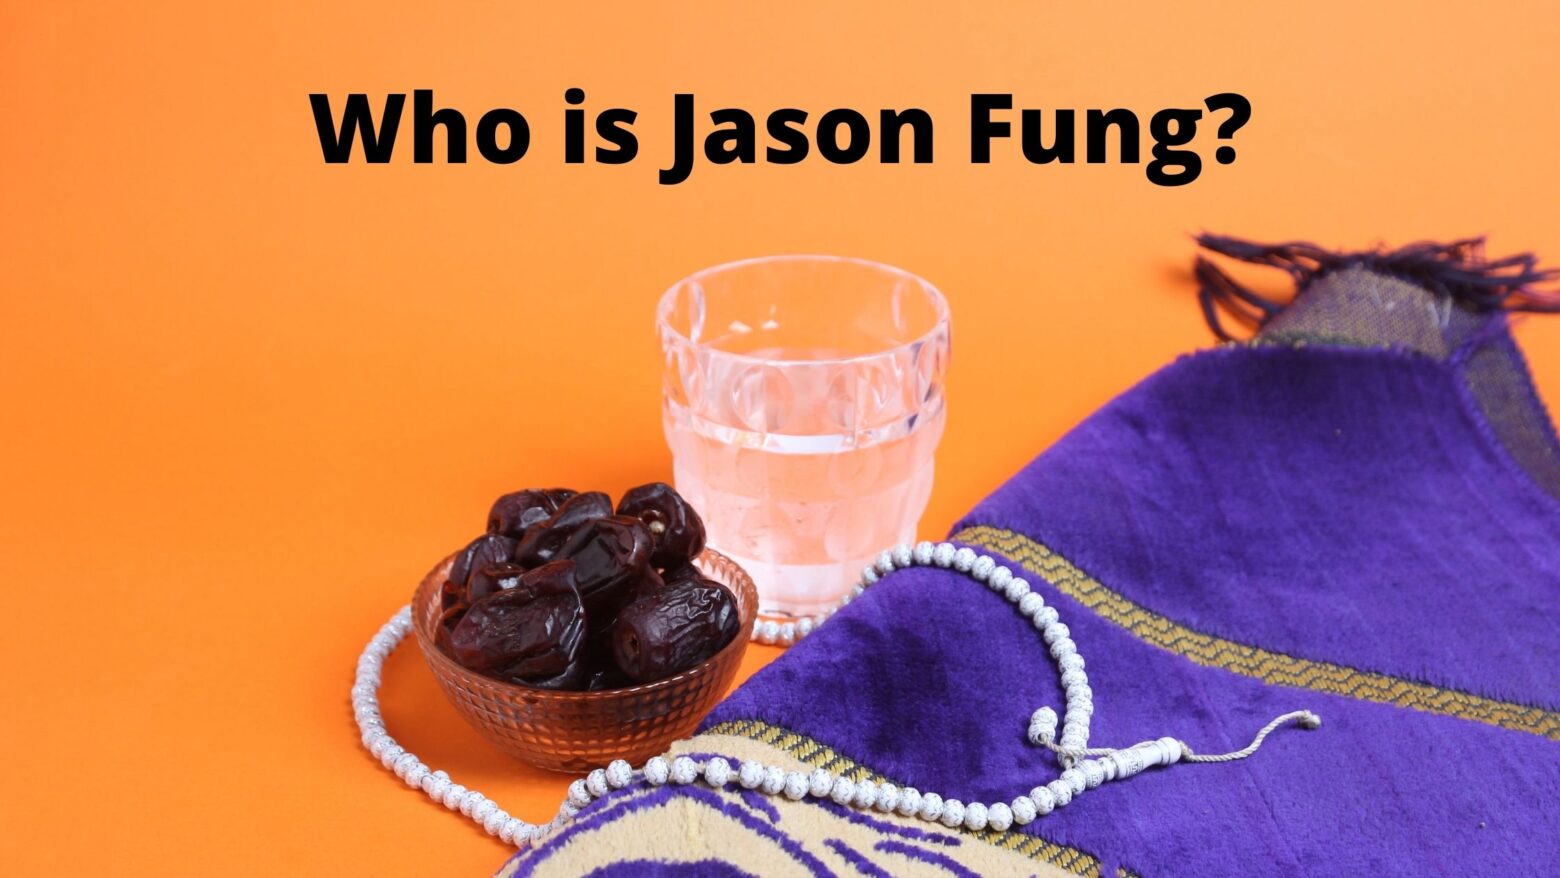 Who is Jason Fung?